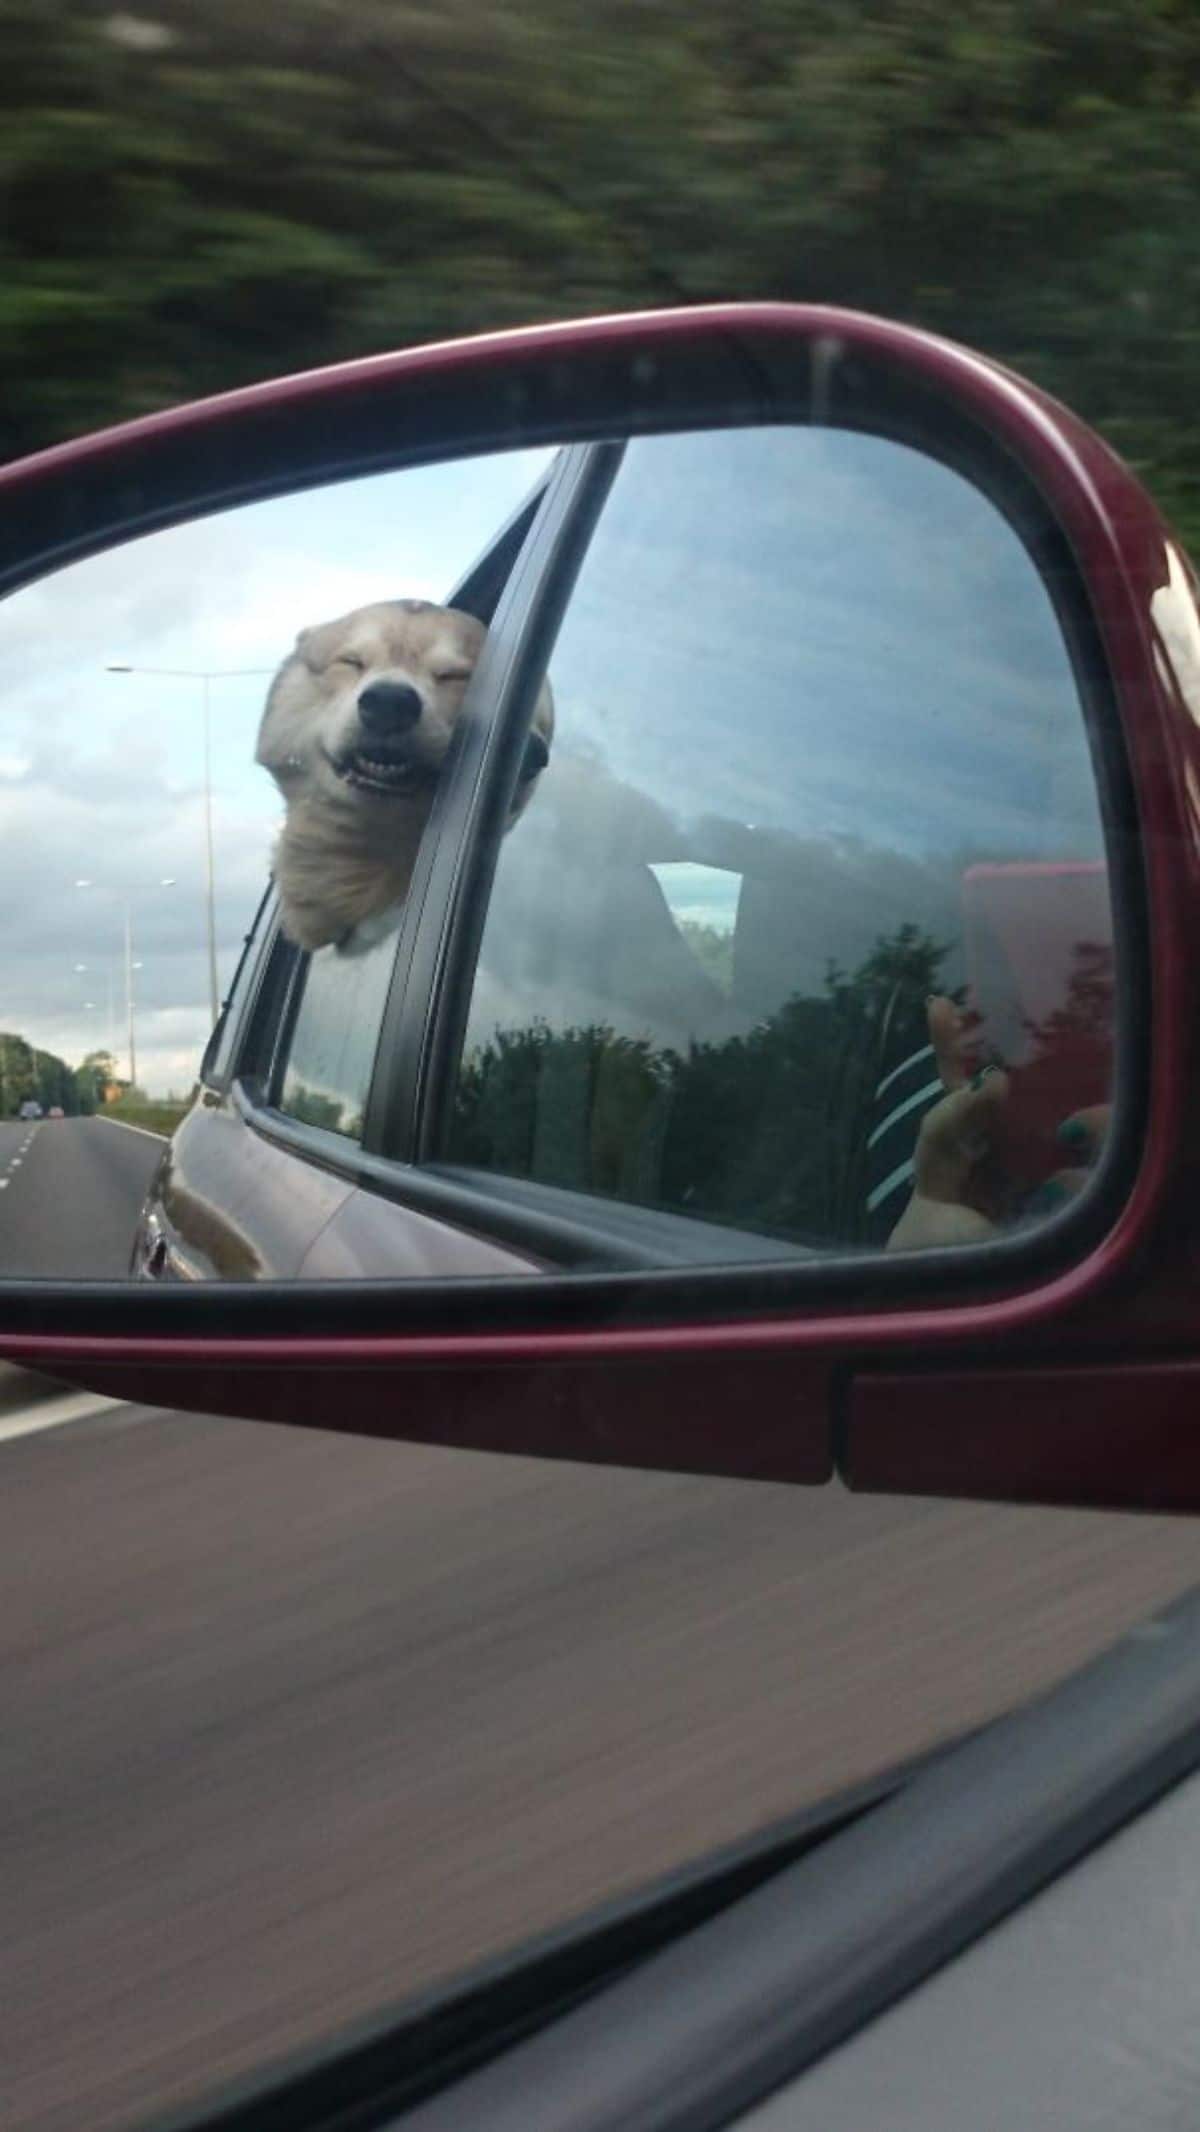 brown and white dog leaning out of a car window with the eyes closed against the wind seen through a side mirror